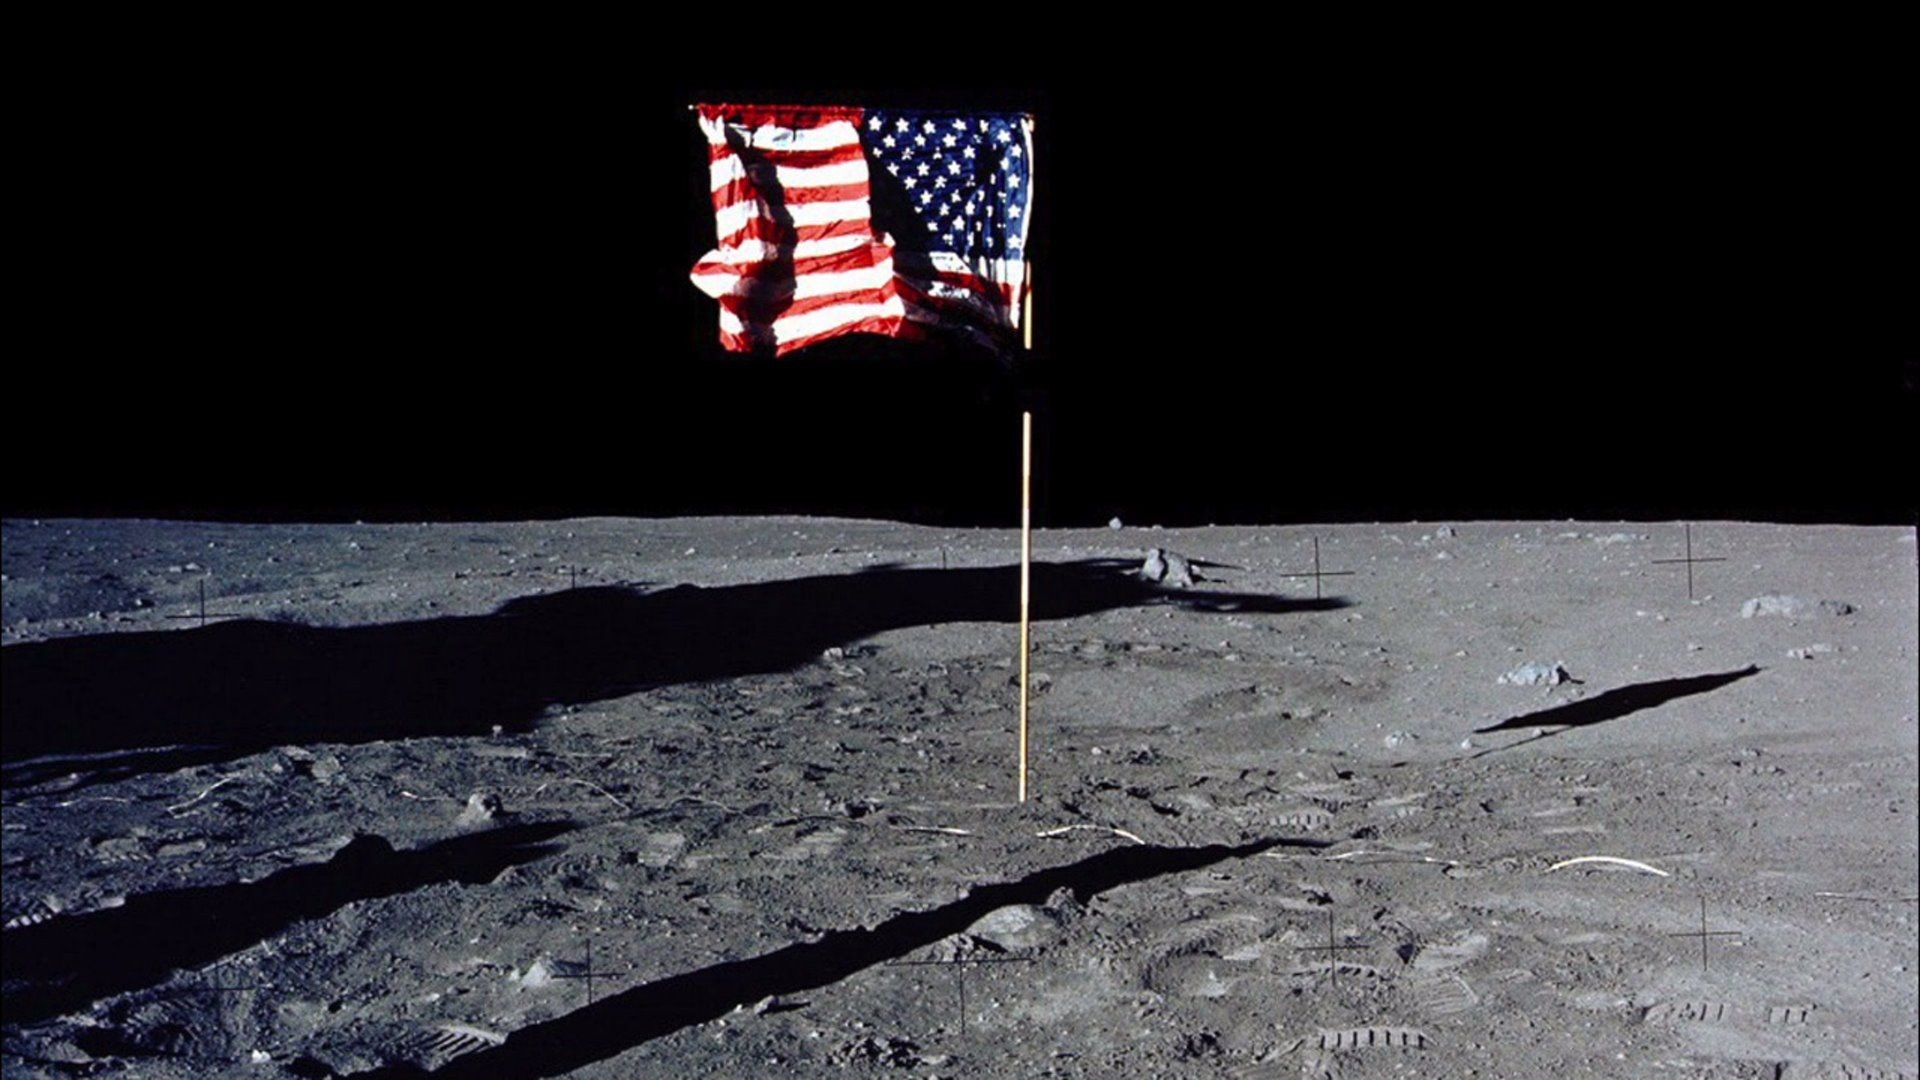 Wham Cam: Number of American Flags Left on the Moon?